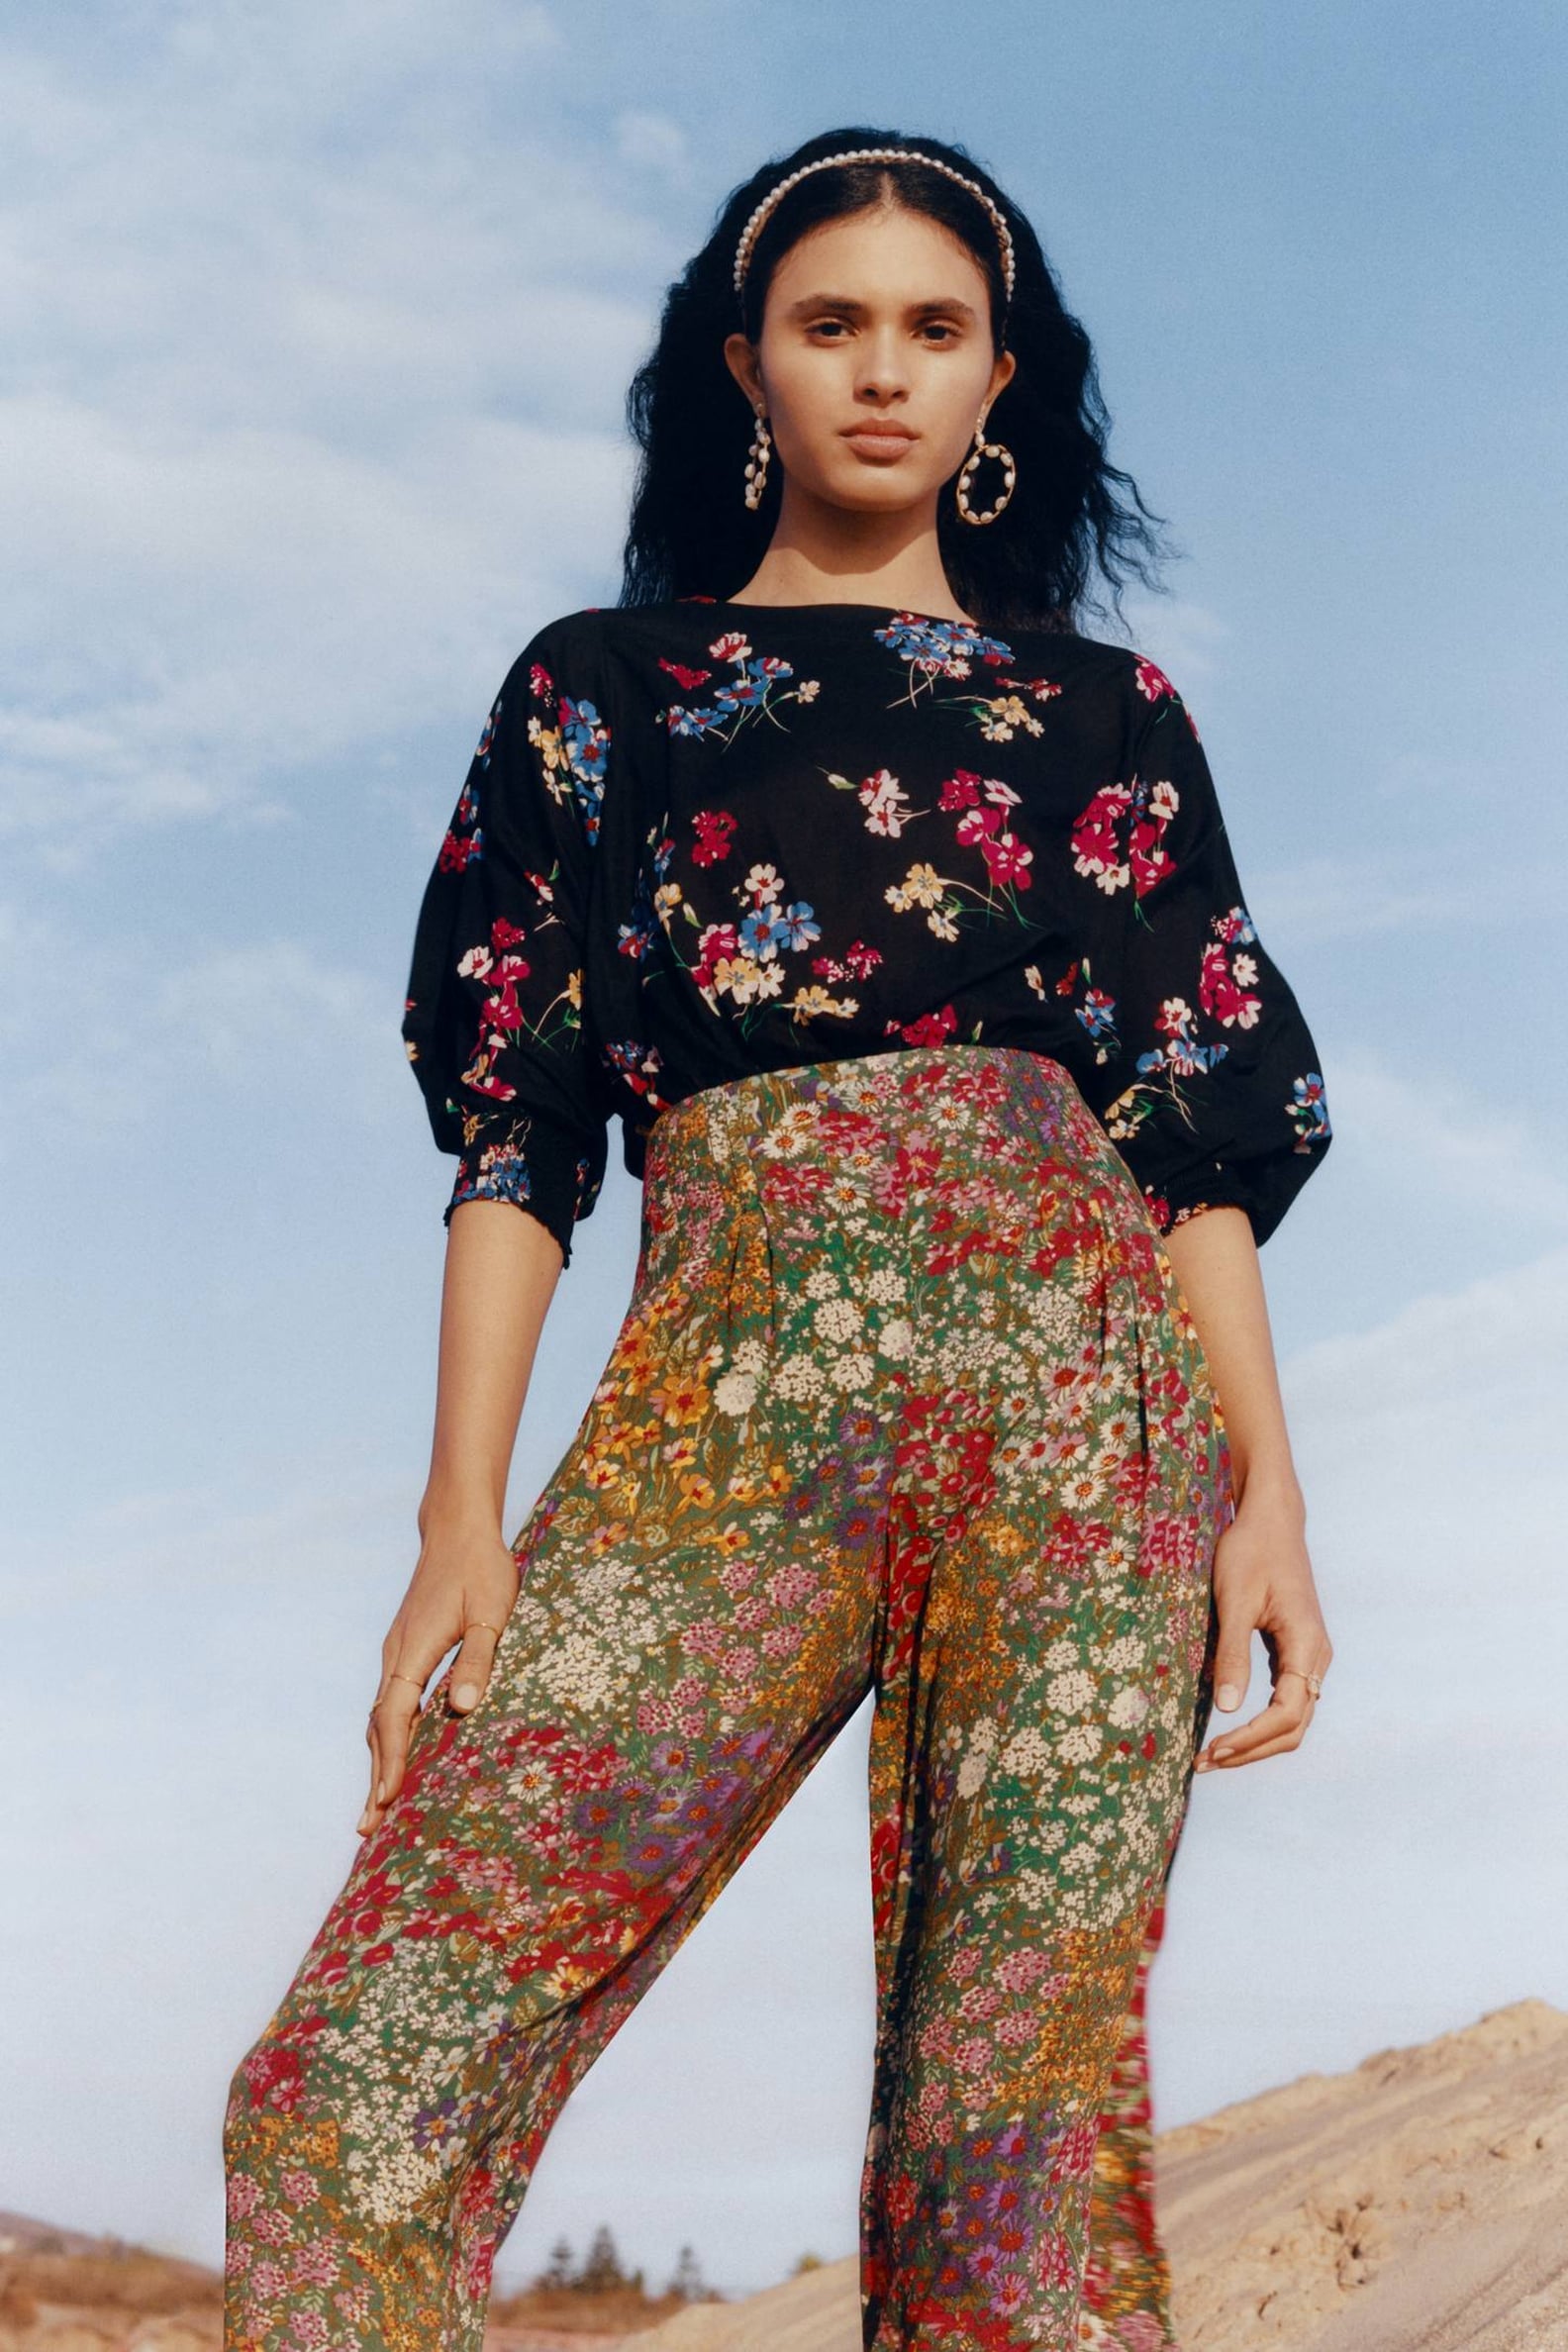 Best New Anthropologie Clothes and Accessories 2020 | POPSUGAR Fashion